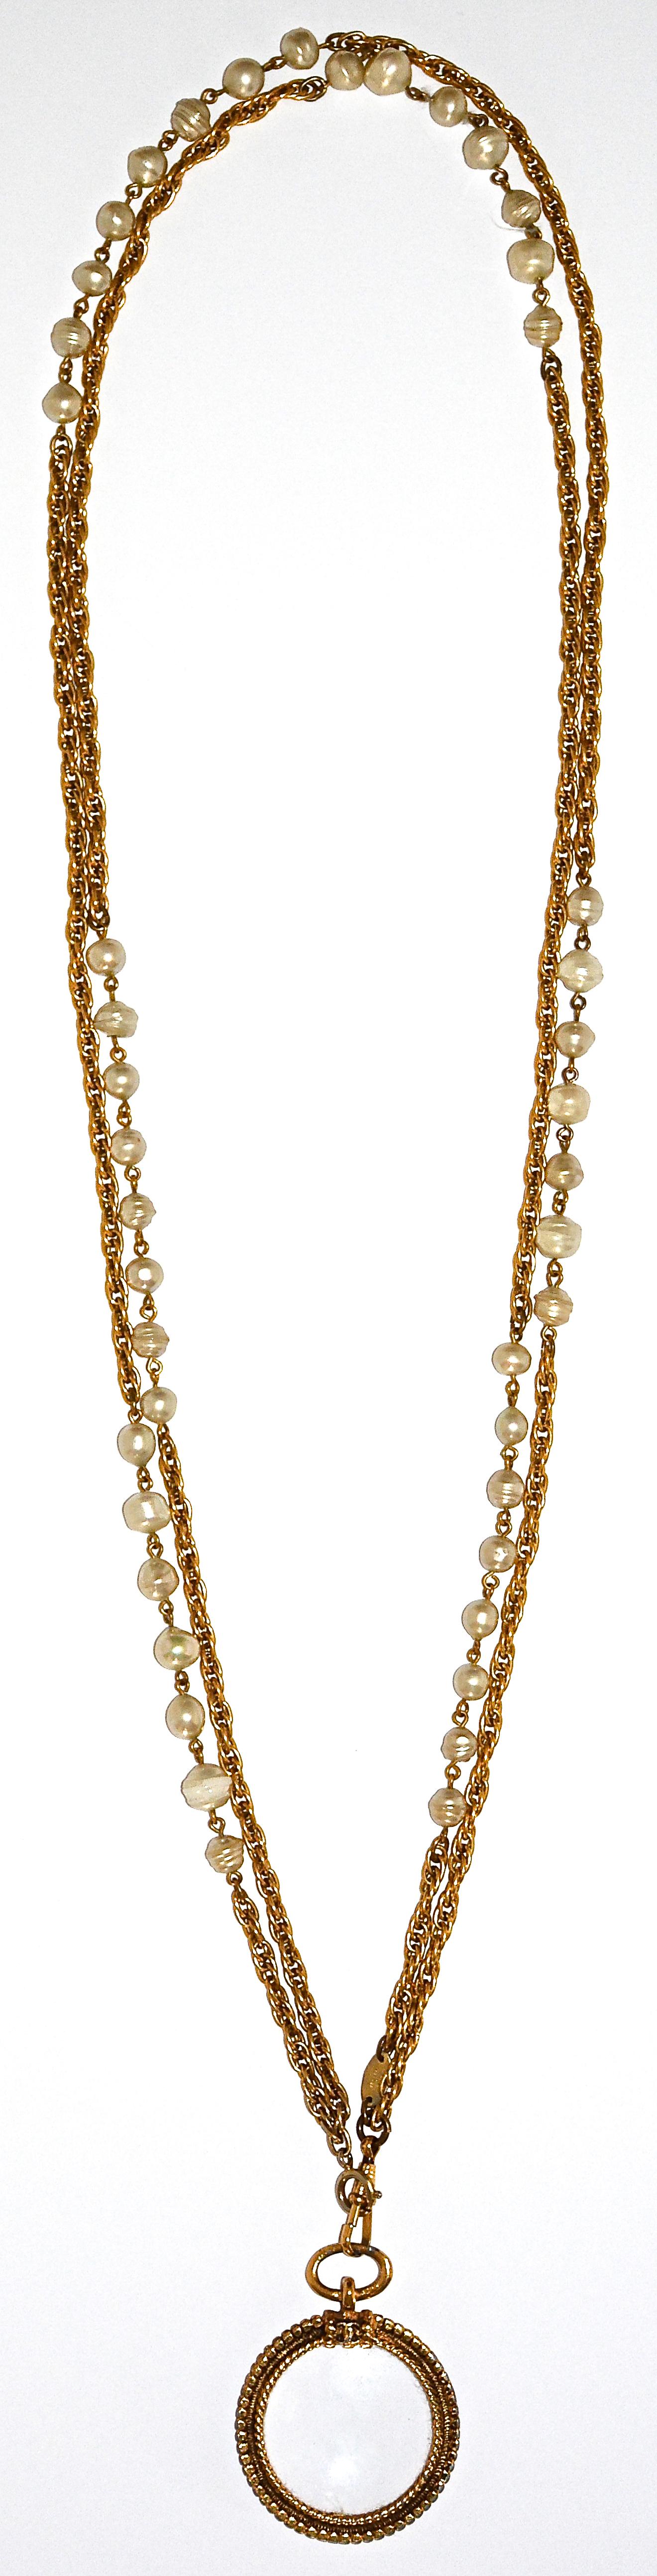 Chanel Vintage Double-Strand Pearl-and-Gold Gilt Chain Necklace with Magnifier For Sale 1